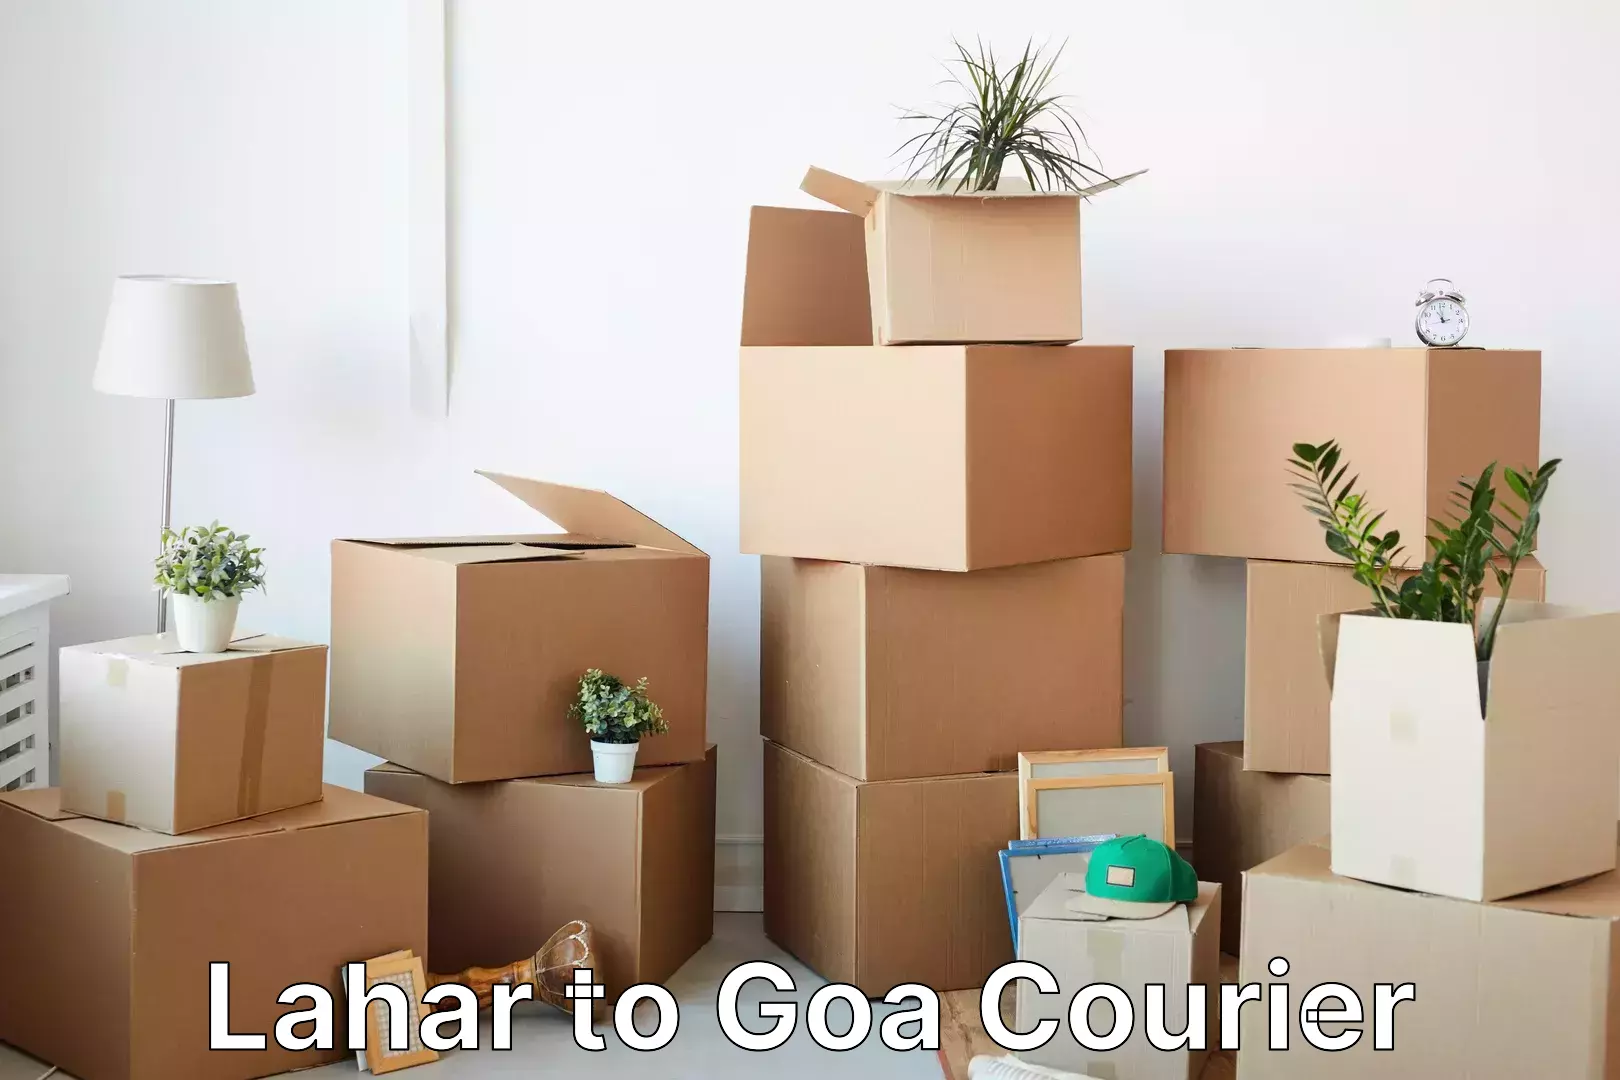 Professional courier handling Lahar to Goa